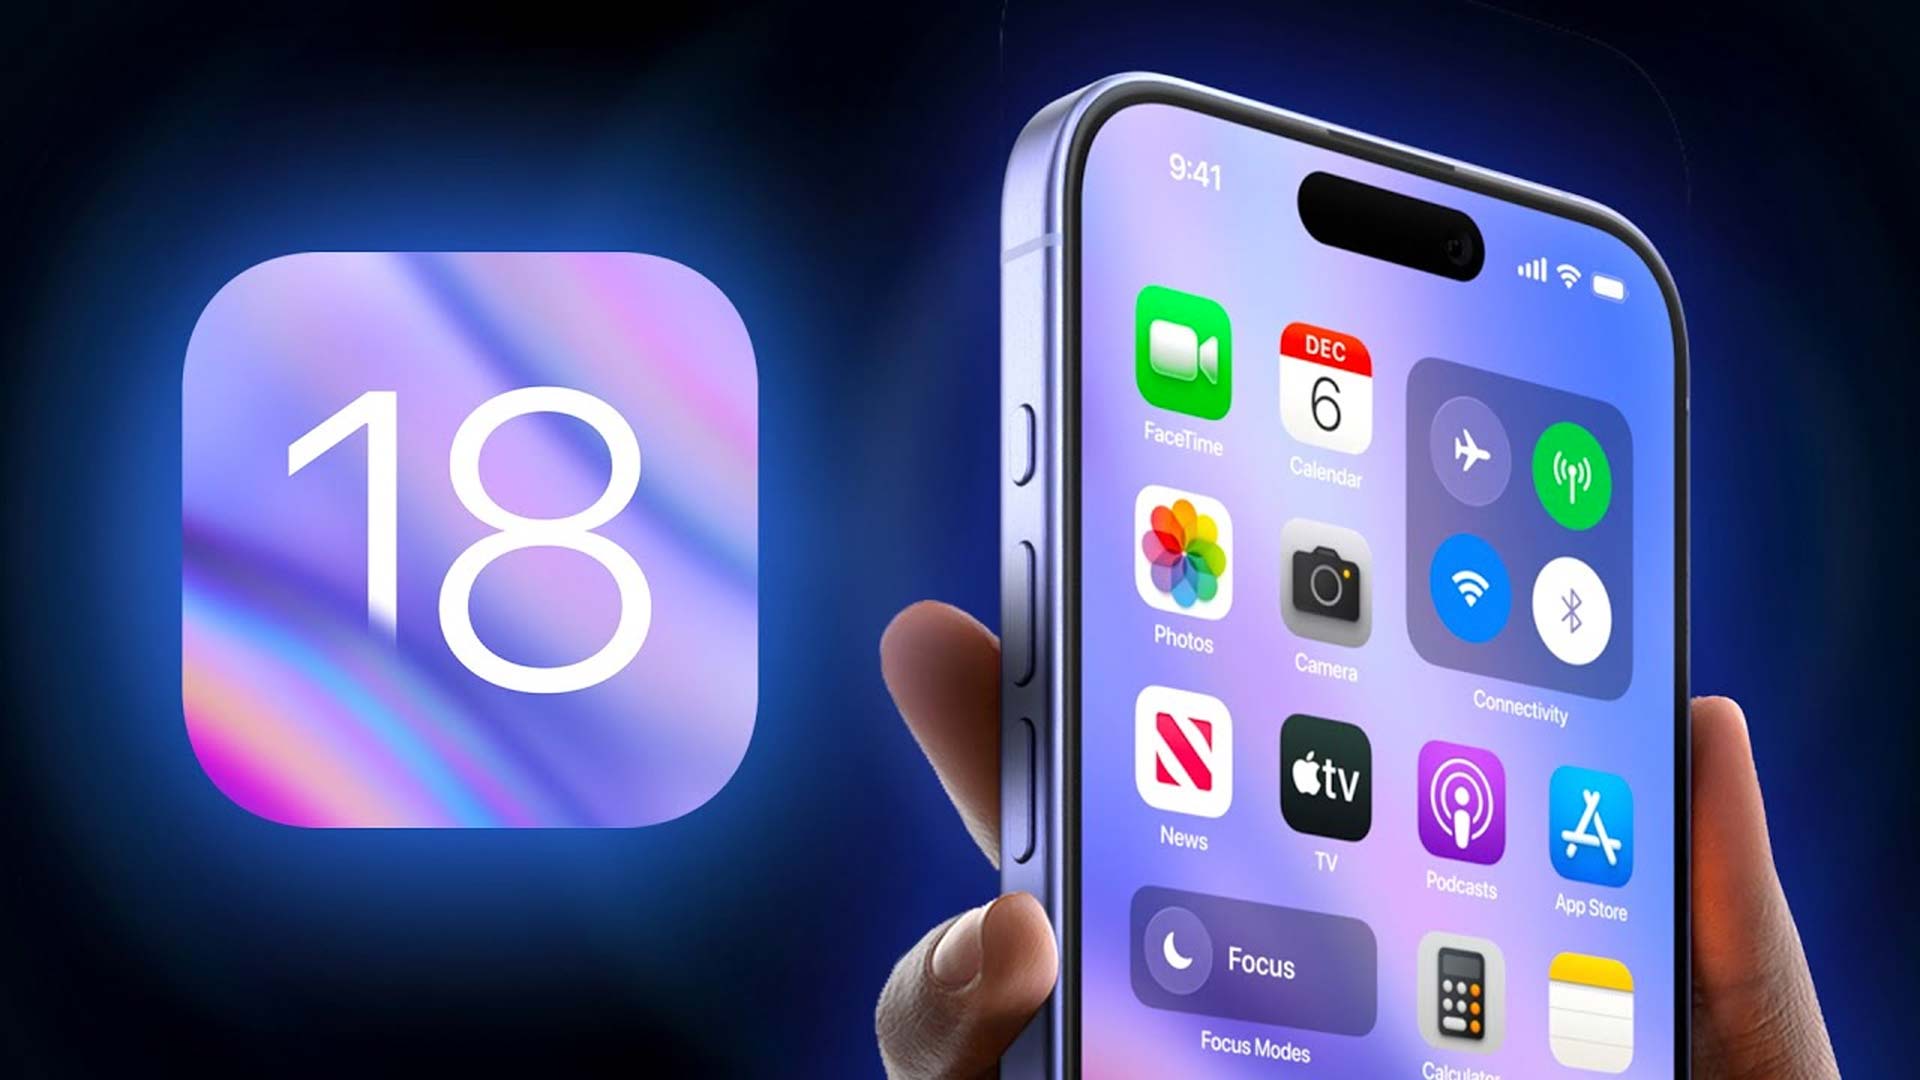 Apple's iOS 18 will allow you to customise the icon and colour of an app